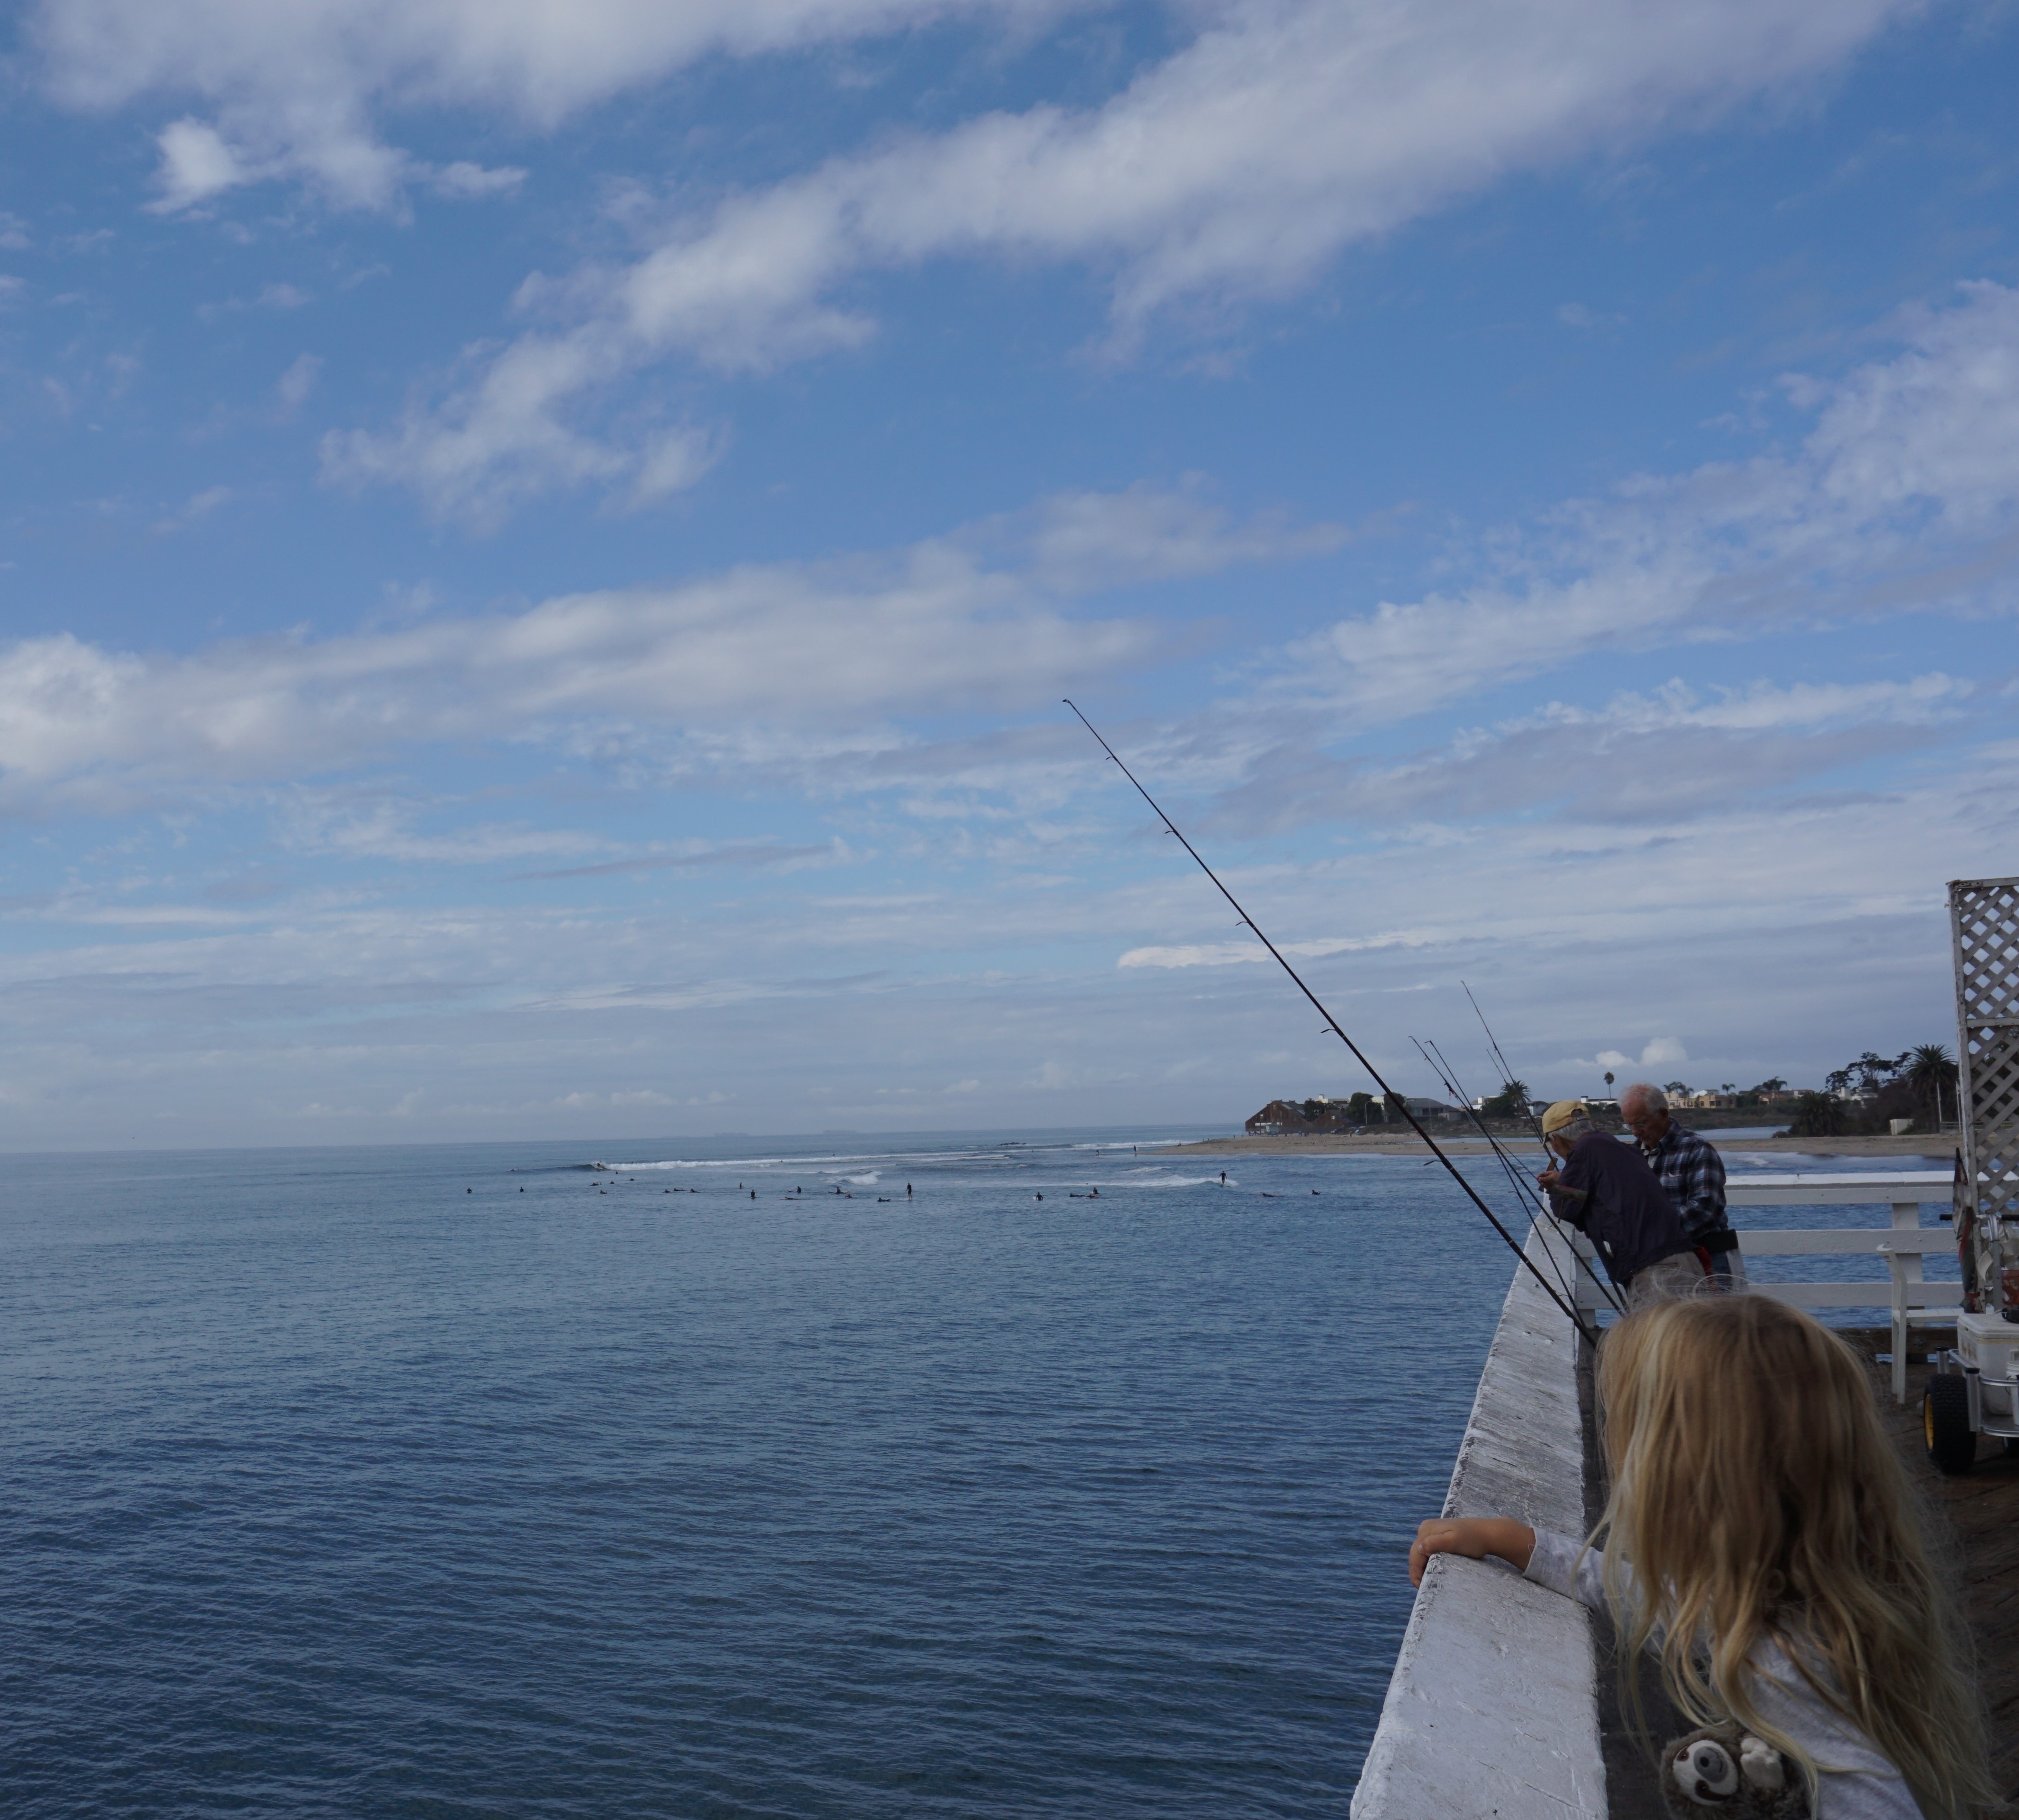 An early morning on the Malibu Pier calls for local fisherman hoping to get a catch for the day while enjoying the breathtaking view of the Pacific Ocean. In the distance you can see the crowd of surfers looking to catch their next wave. 